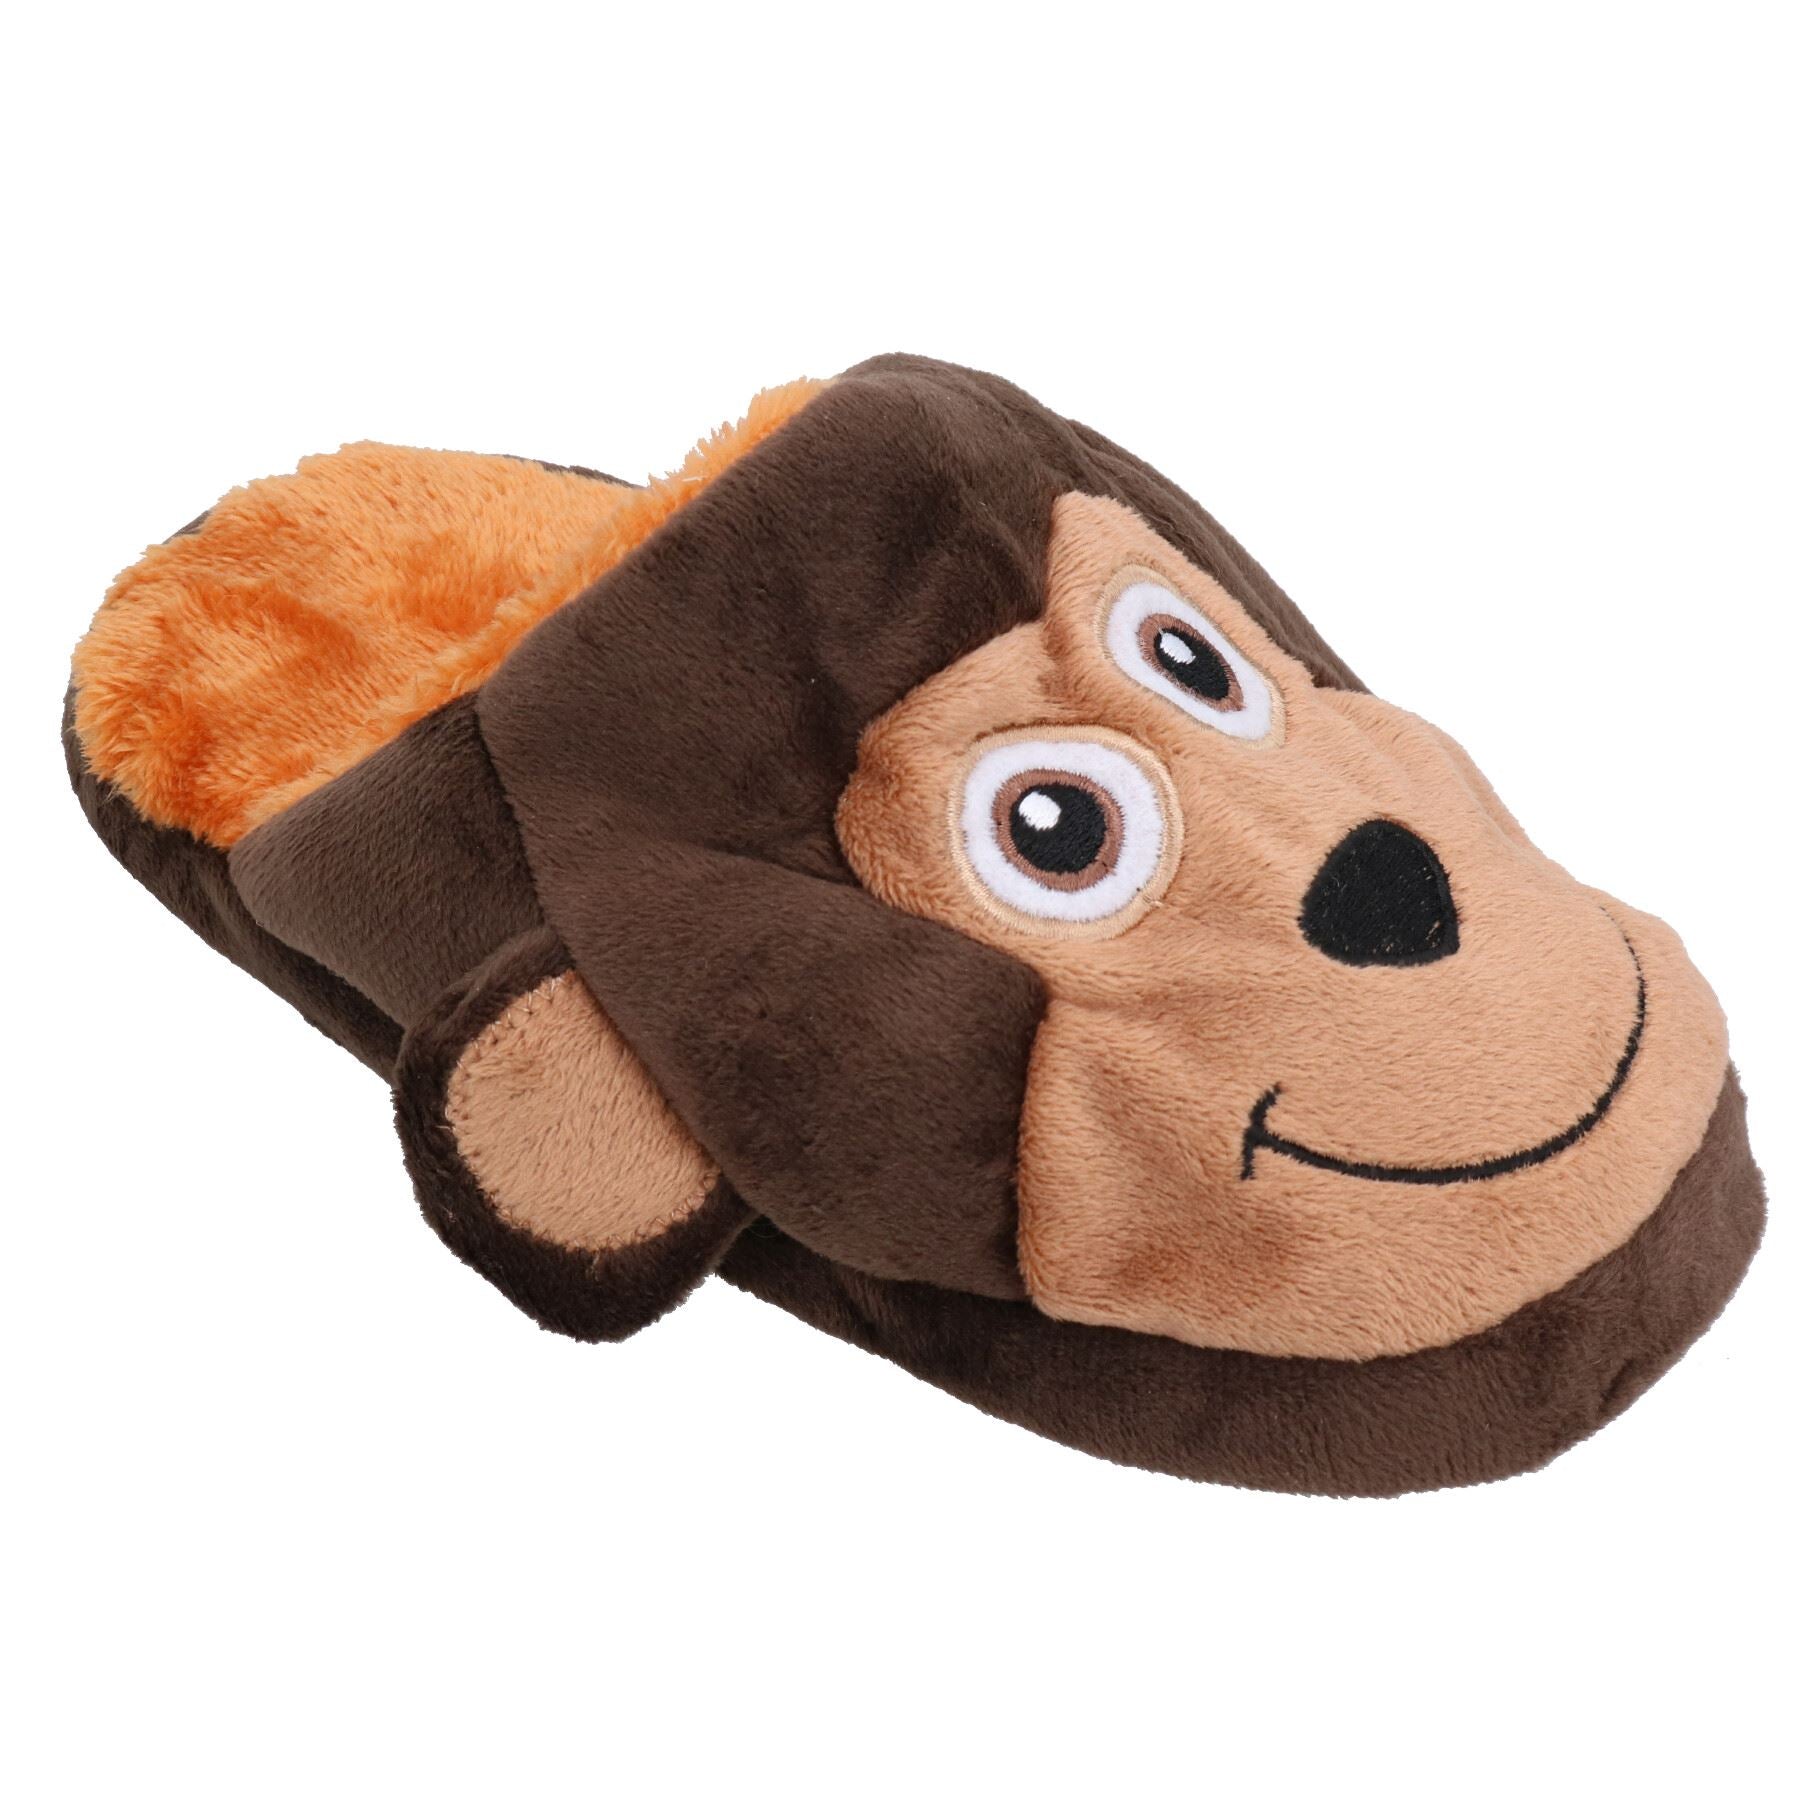 Dog Puppy Gift Shoe Lover Squeaky Plush Doggy's Monkey Slipper Play Toy